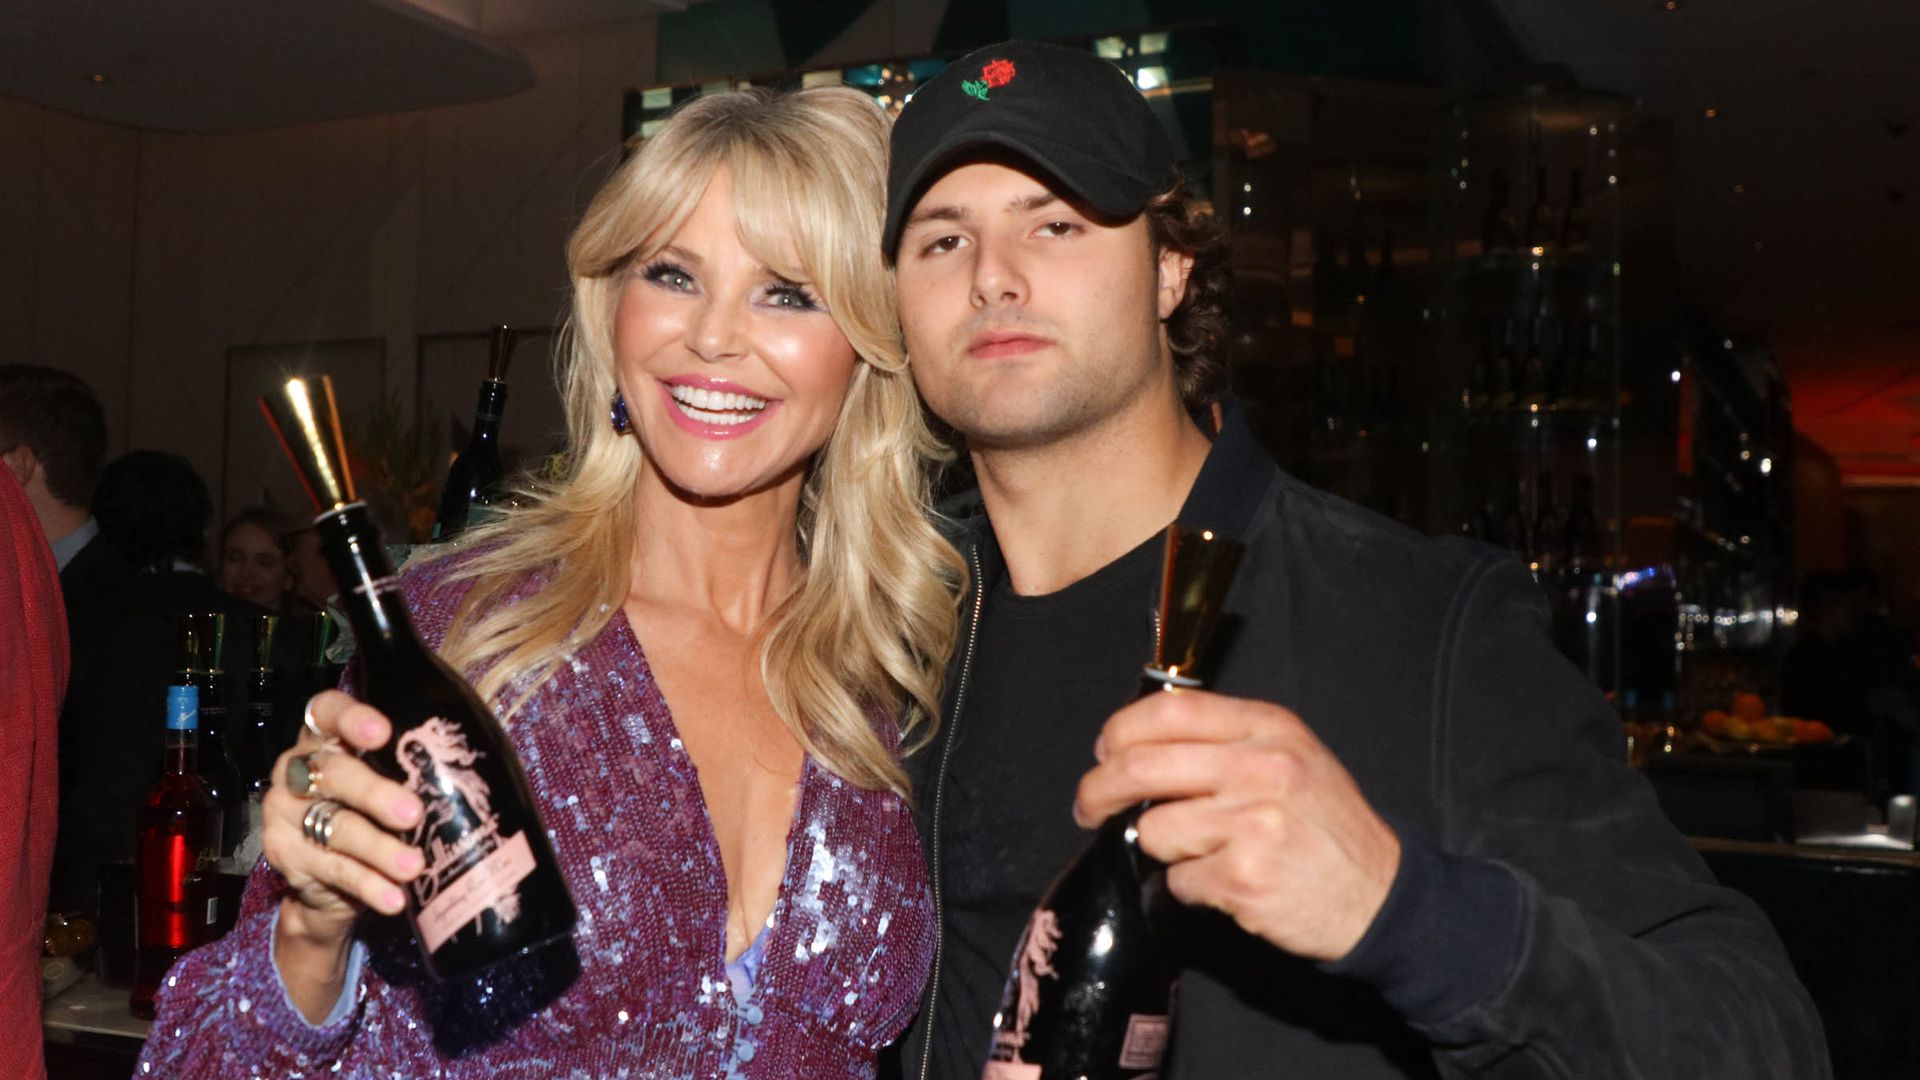 Christie brinkley poses with her son Jack